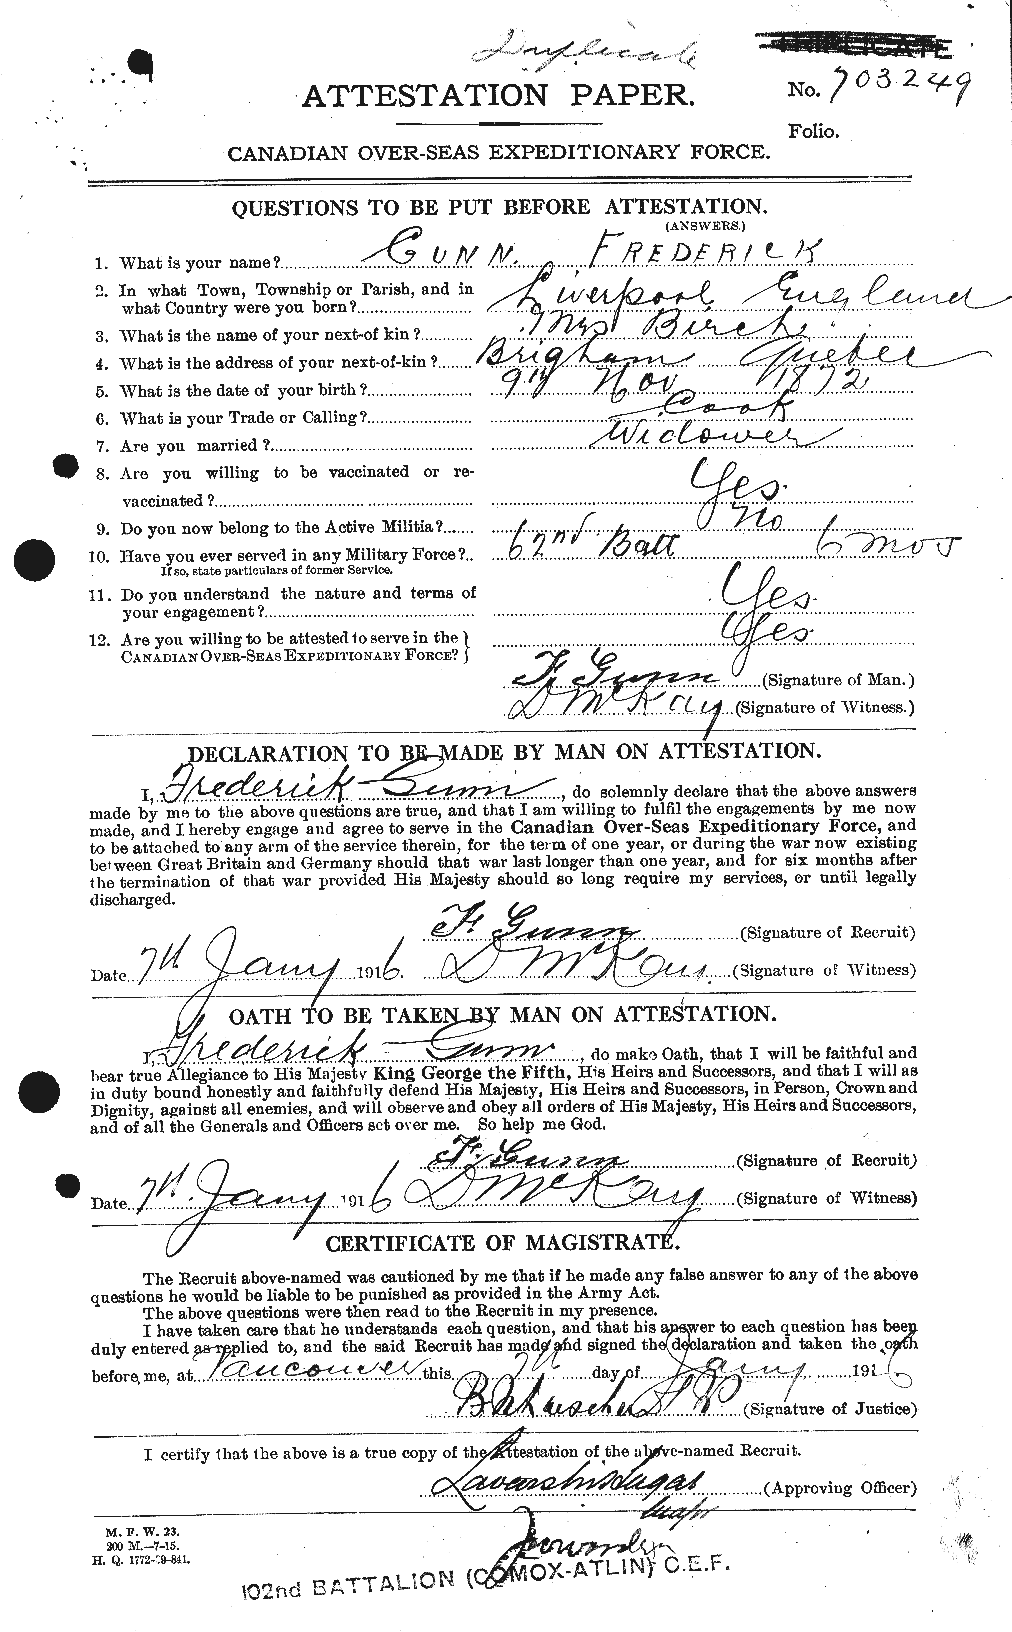 Personnel Records of the First World War - CEF 369233a